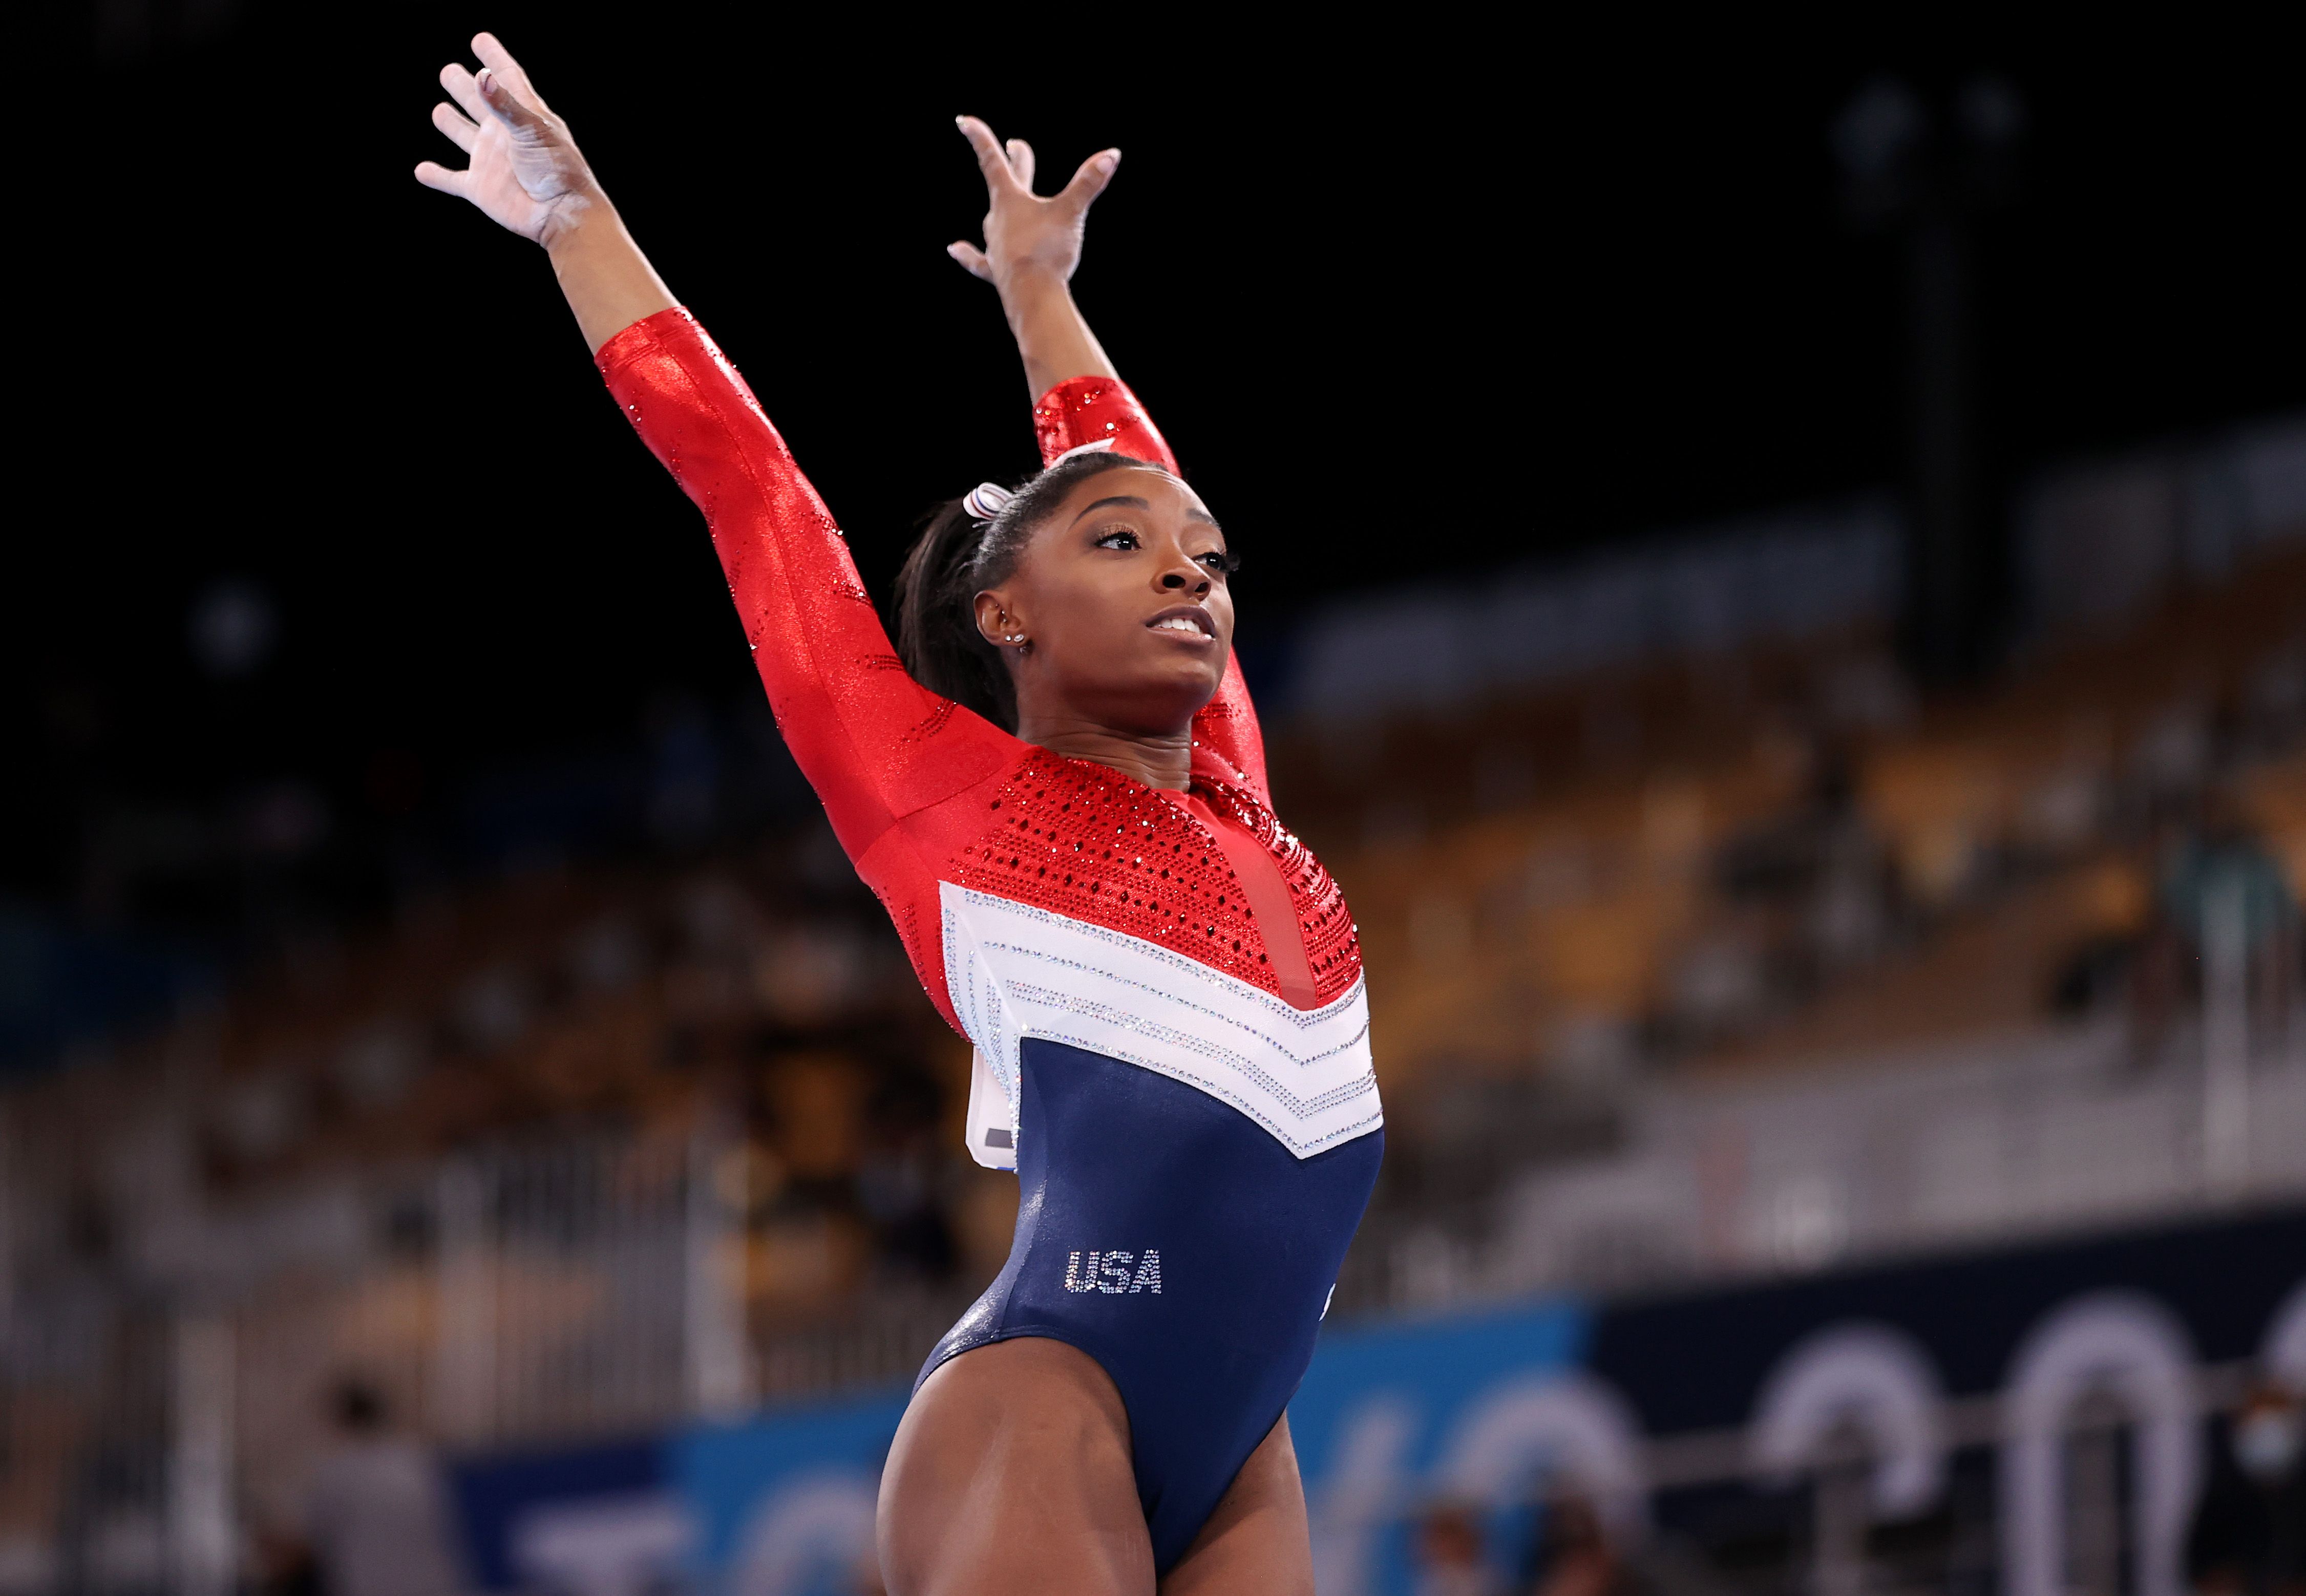 Who is Simone Biles' coach and mentor?